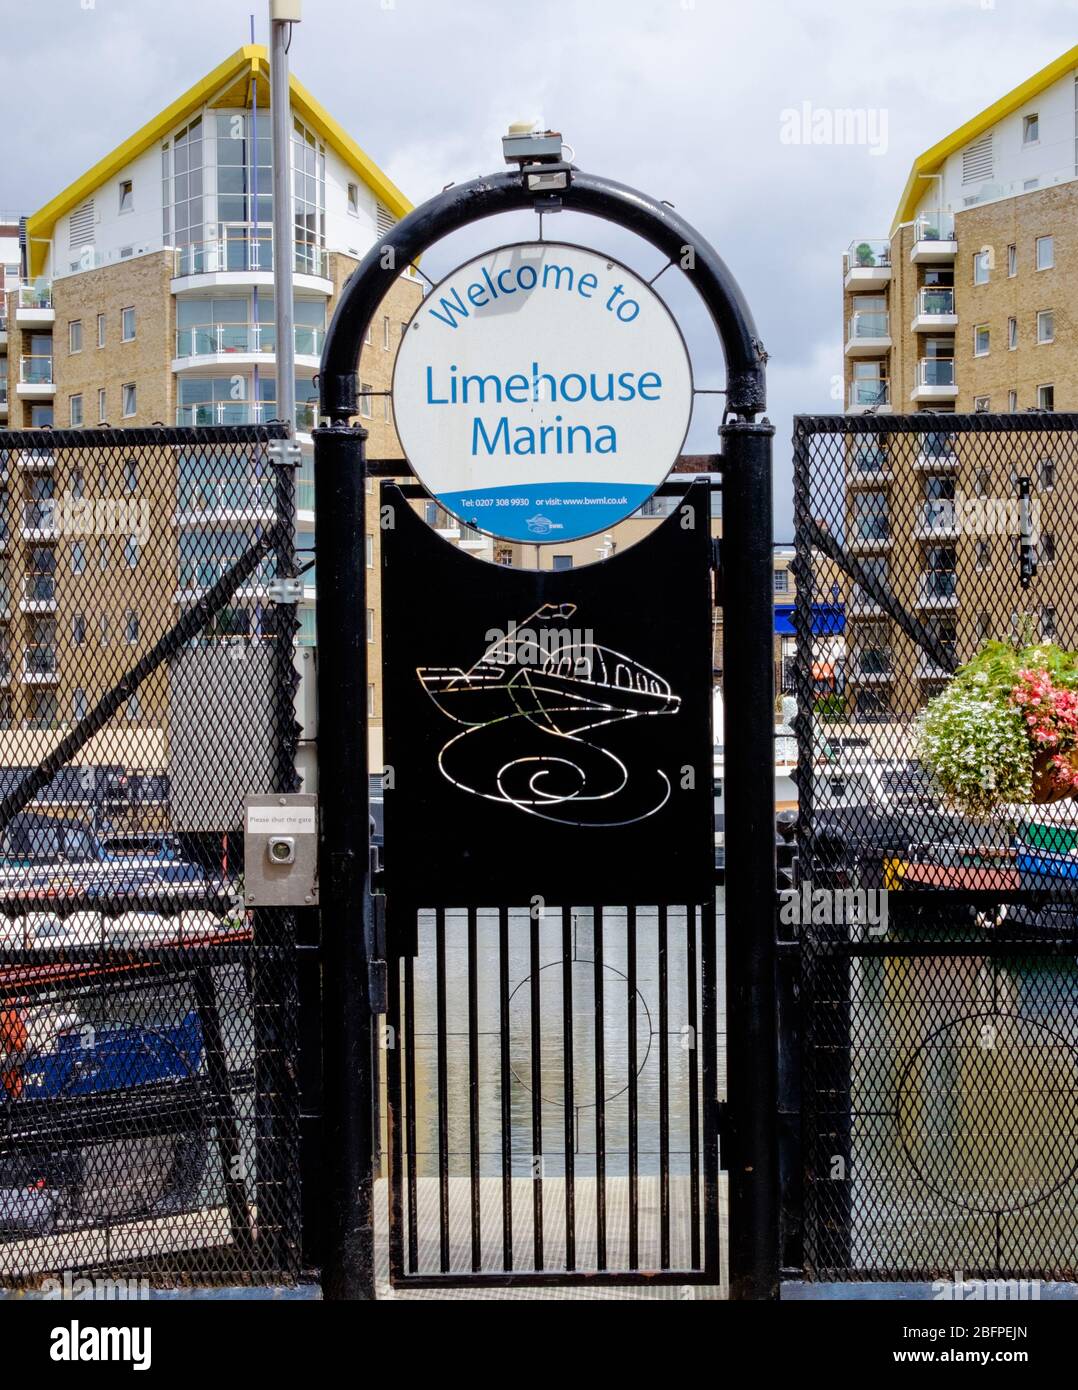 Welcome to Limehouse Marina Sign on gate at entrance, Tower Hamlets, East London, England, UK Stock Photo